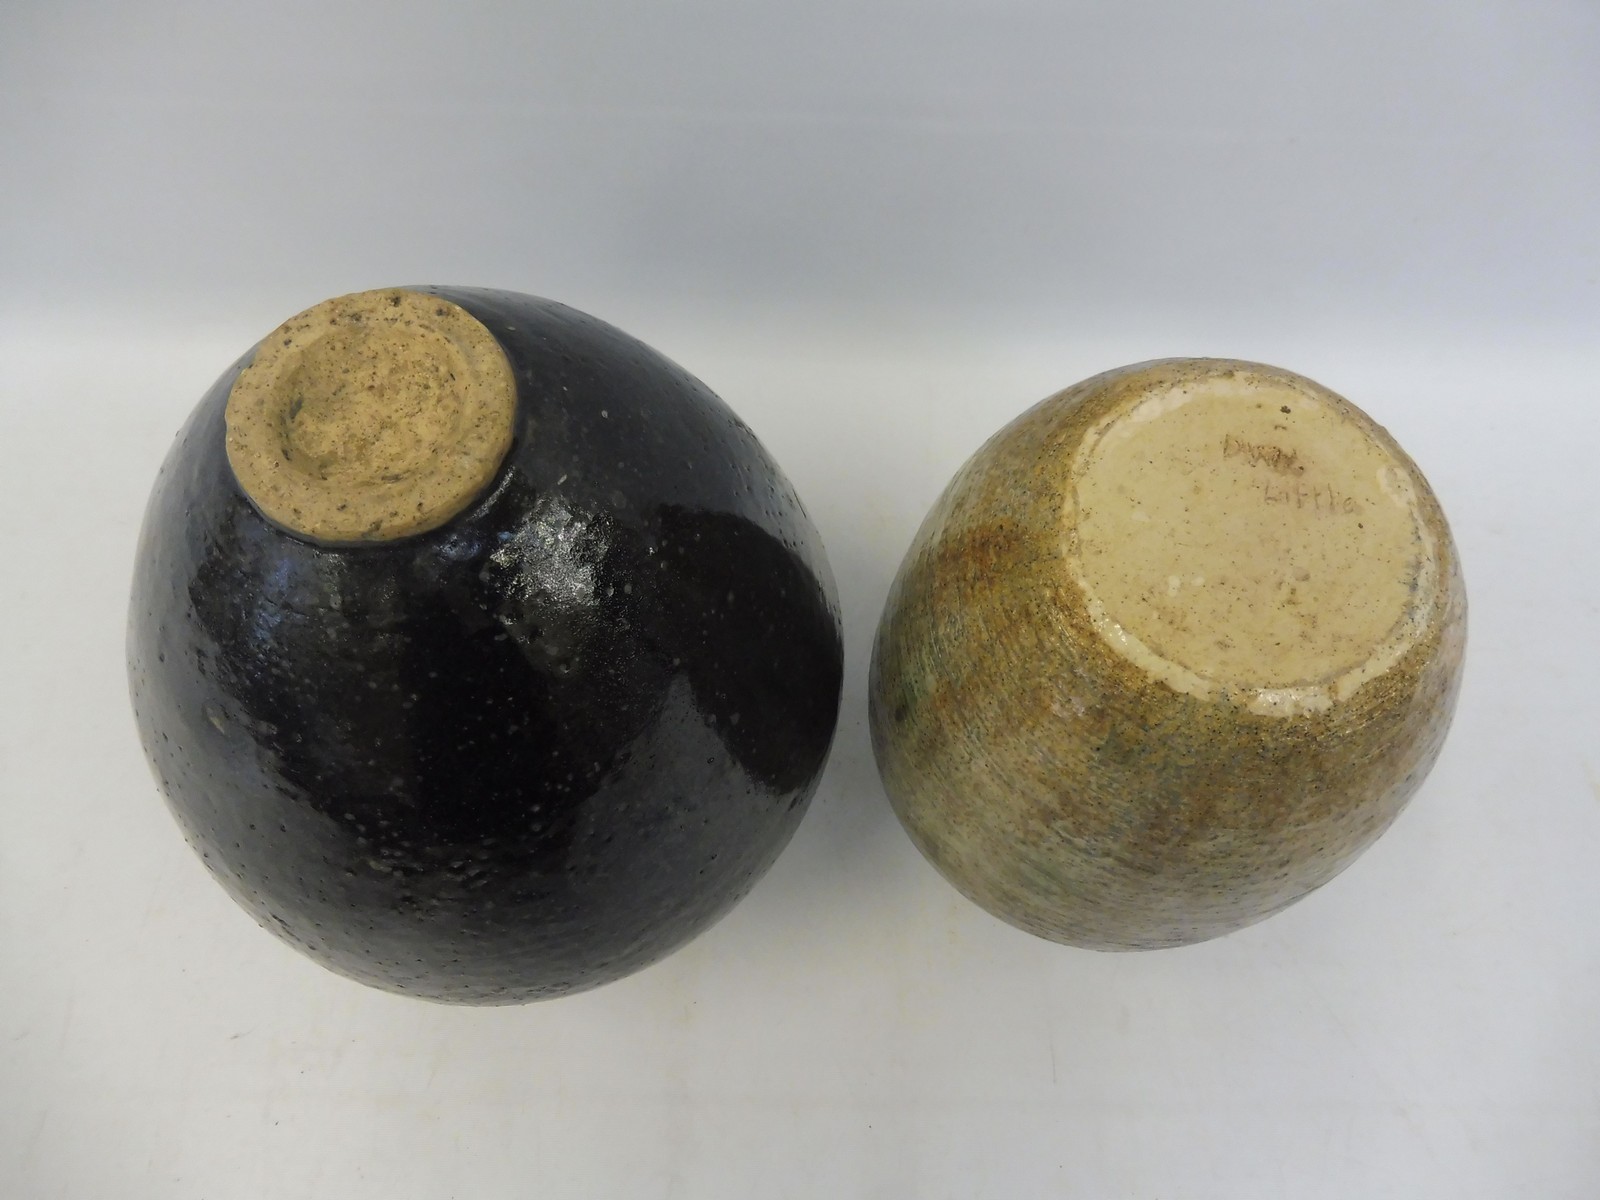 Two studio pottery vases, the tallest 8 1/2" high, the smallest signed 'Little'. - Image 5 of 5